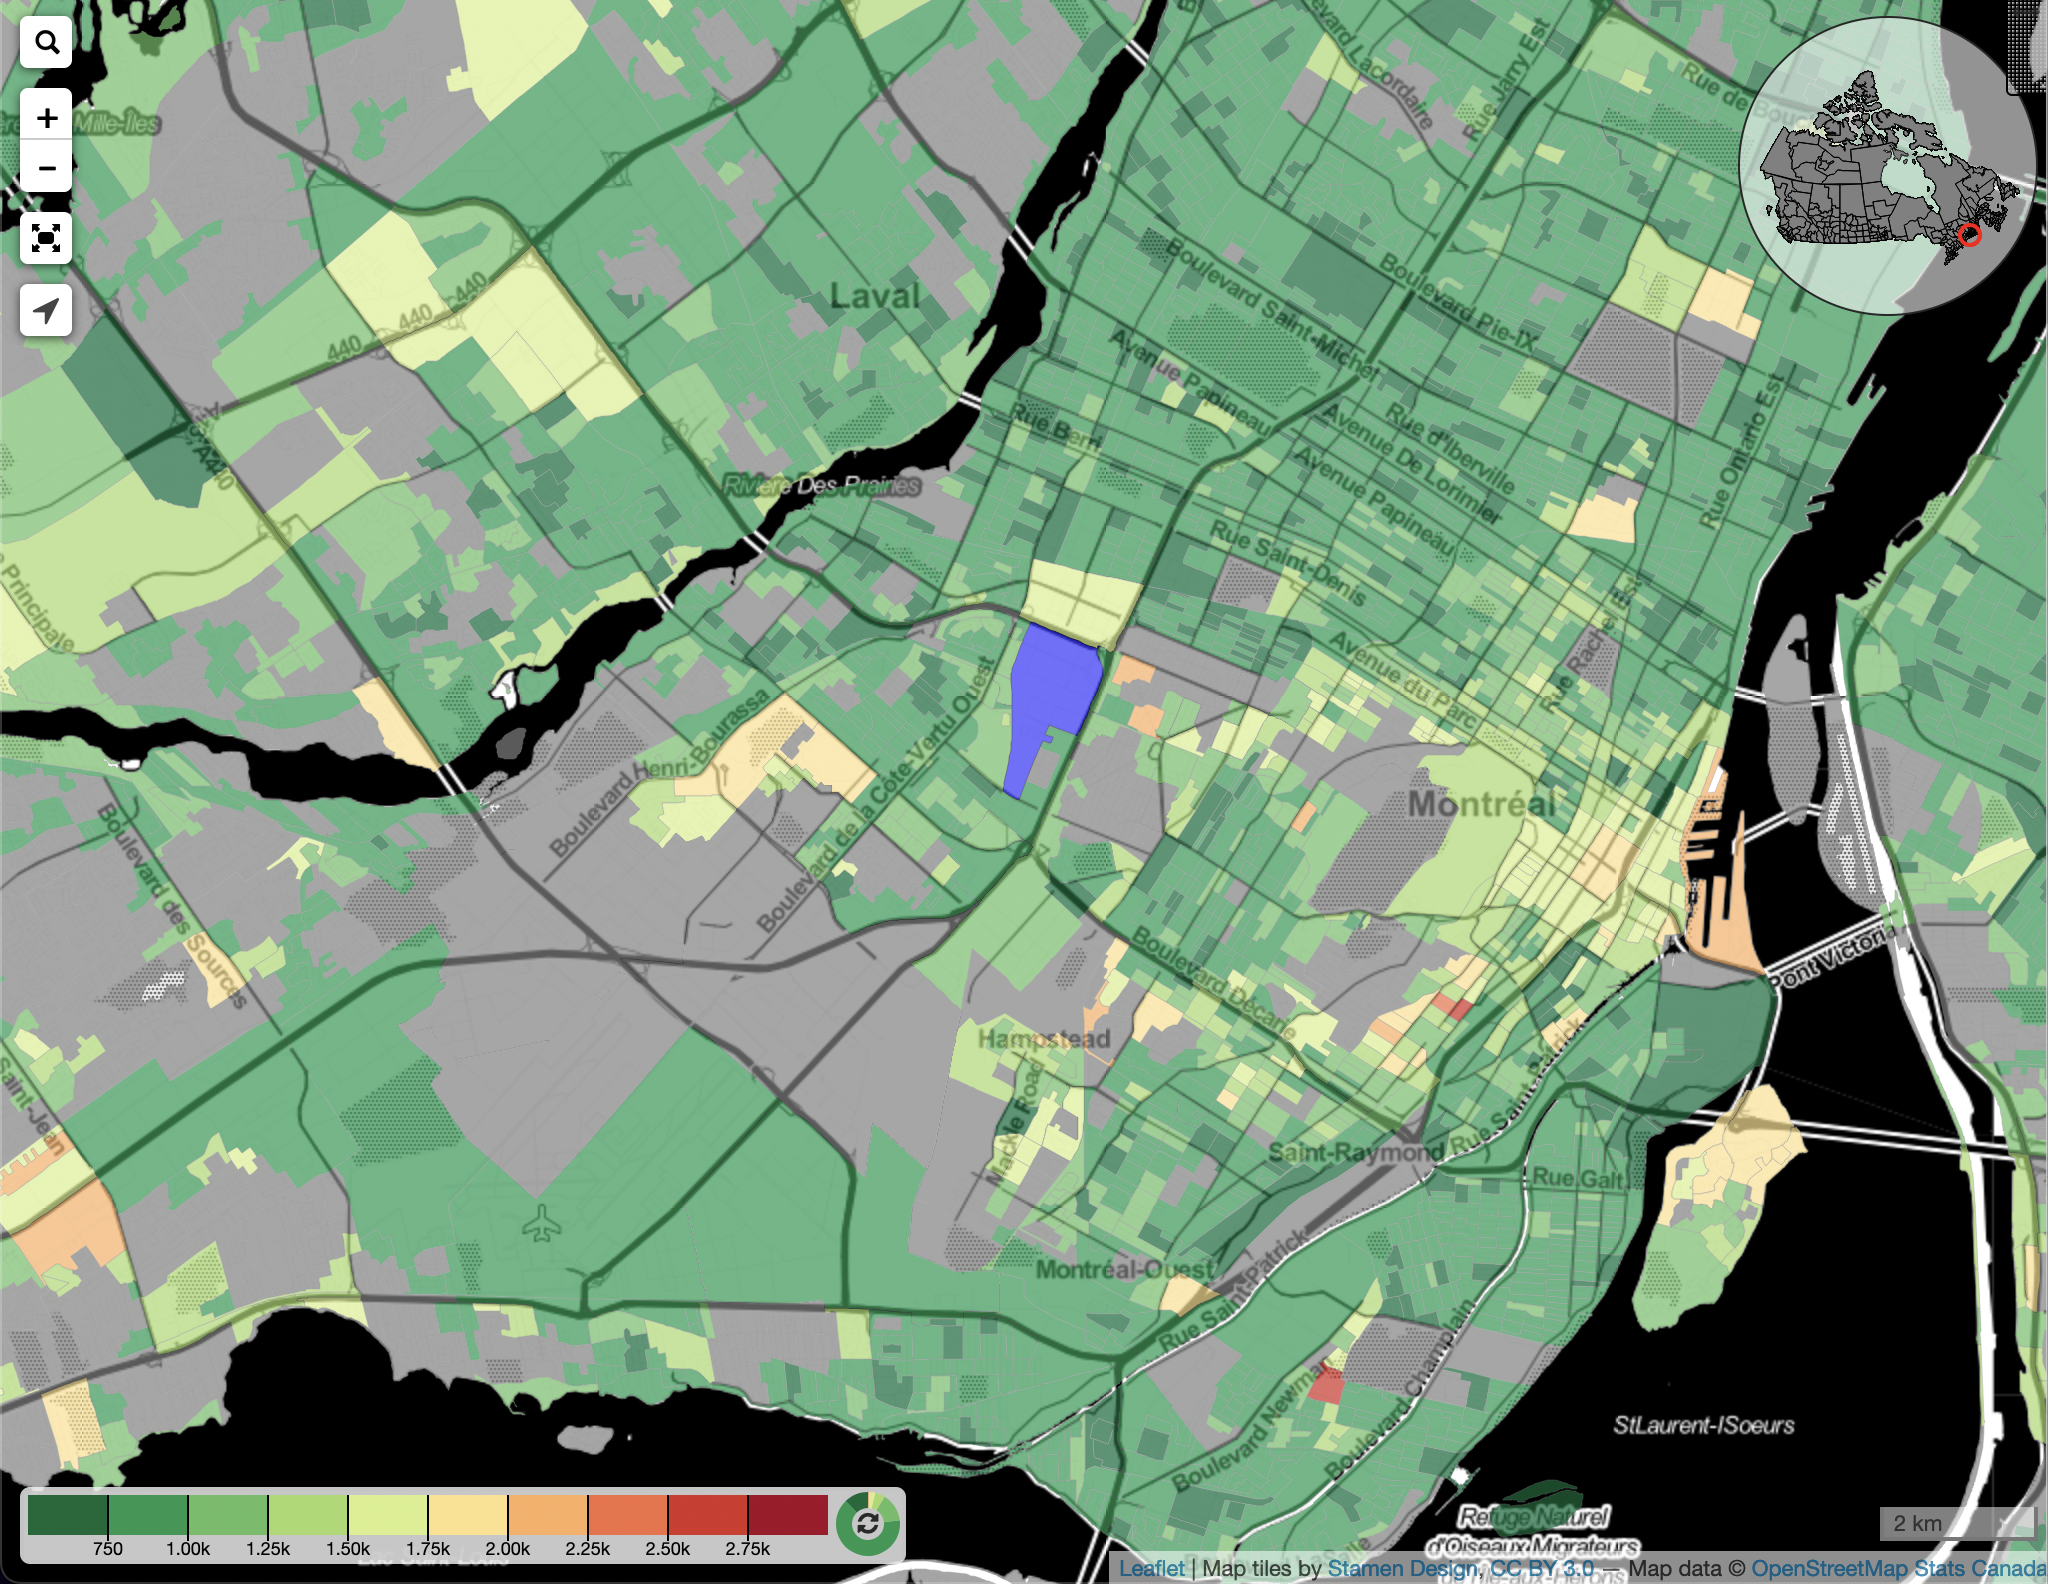 Median monthly shelter costs for rented dwellings in Montreal, CAD